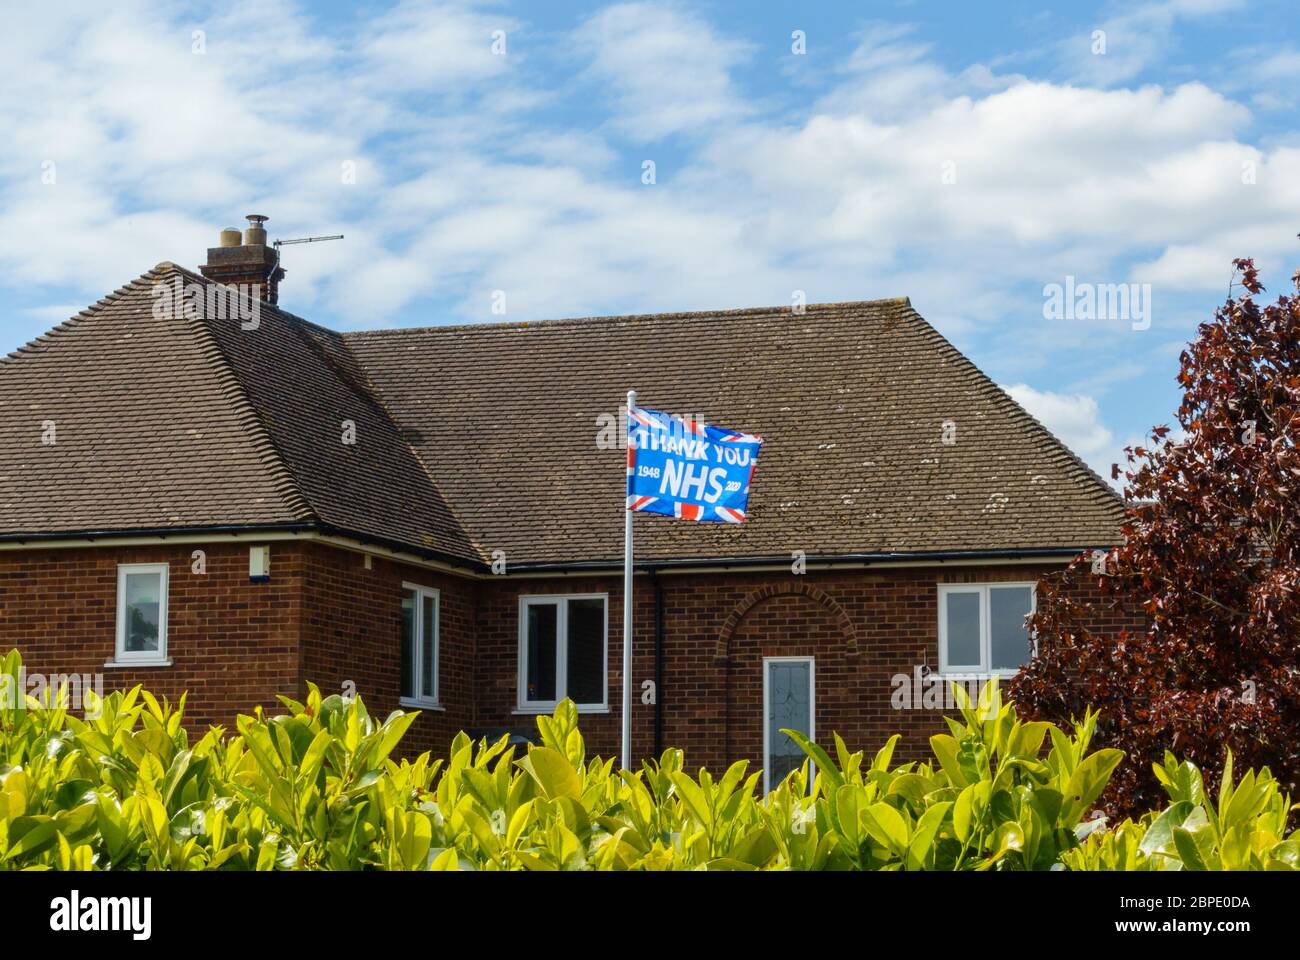 'Thank You NHS' union flag flying on flagpole in front of house to say thanks to NHS during the coronavirus pandemic, May 2020, England, UK Stock Photo